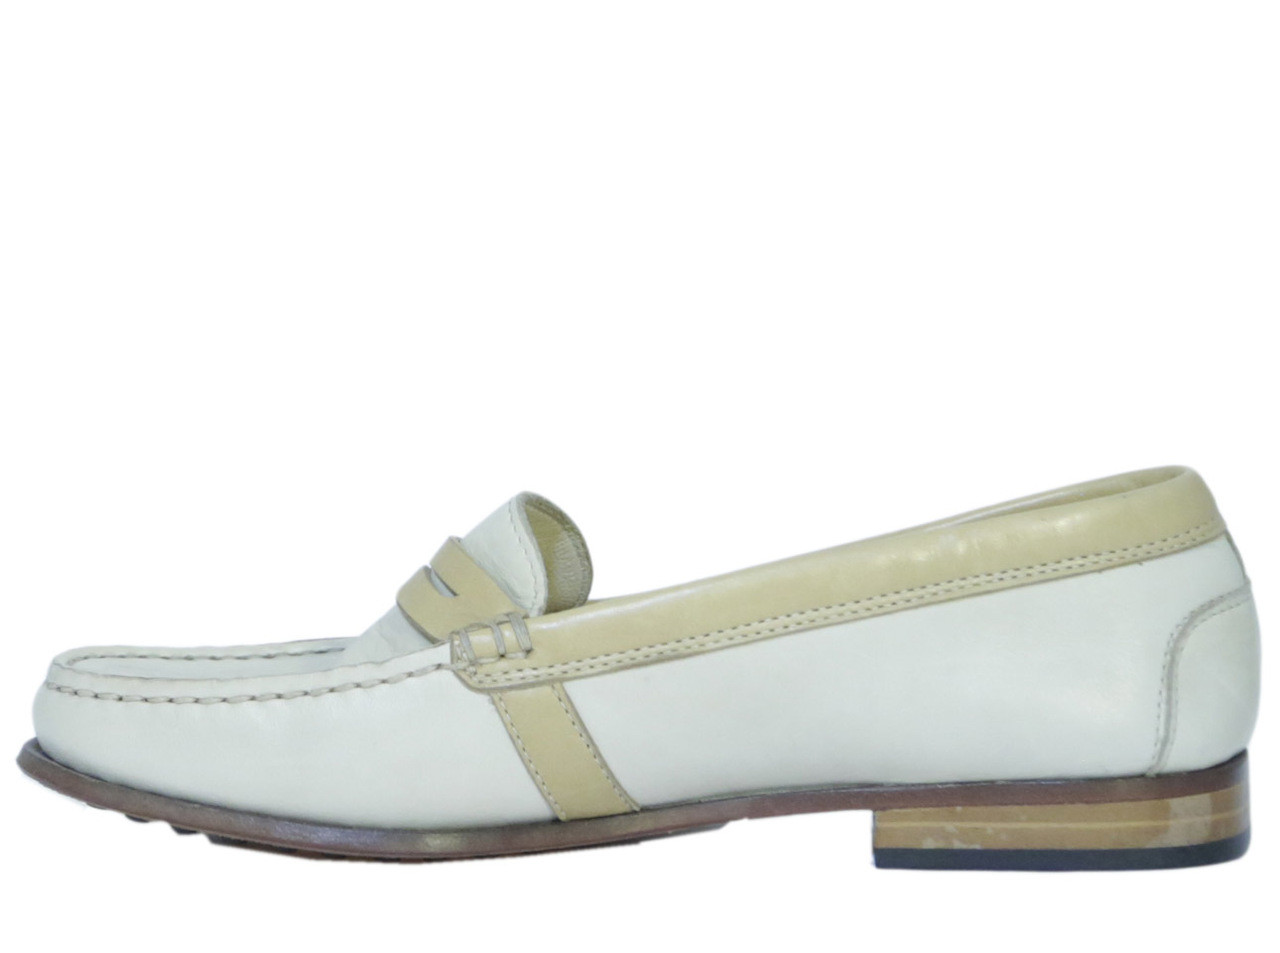 Job's Women 8480 Casual Penny Loafer Shoes Beige 8480